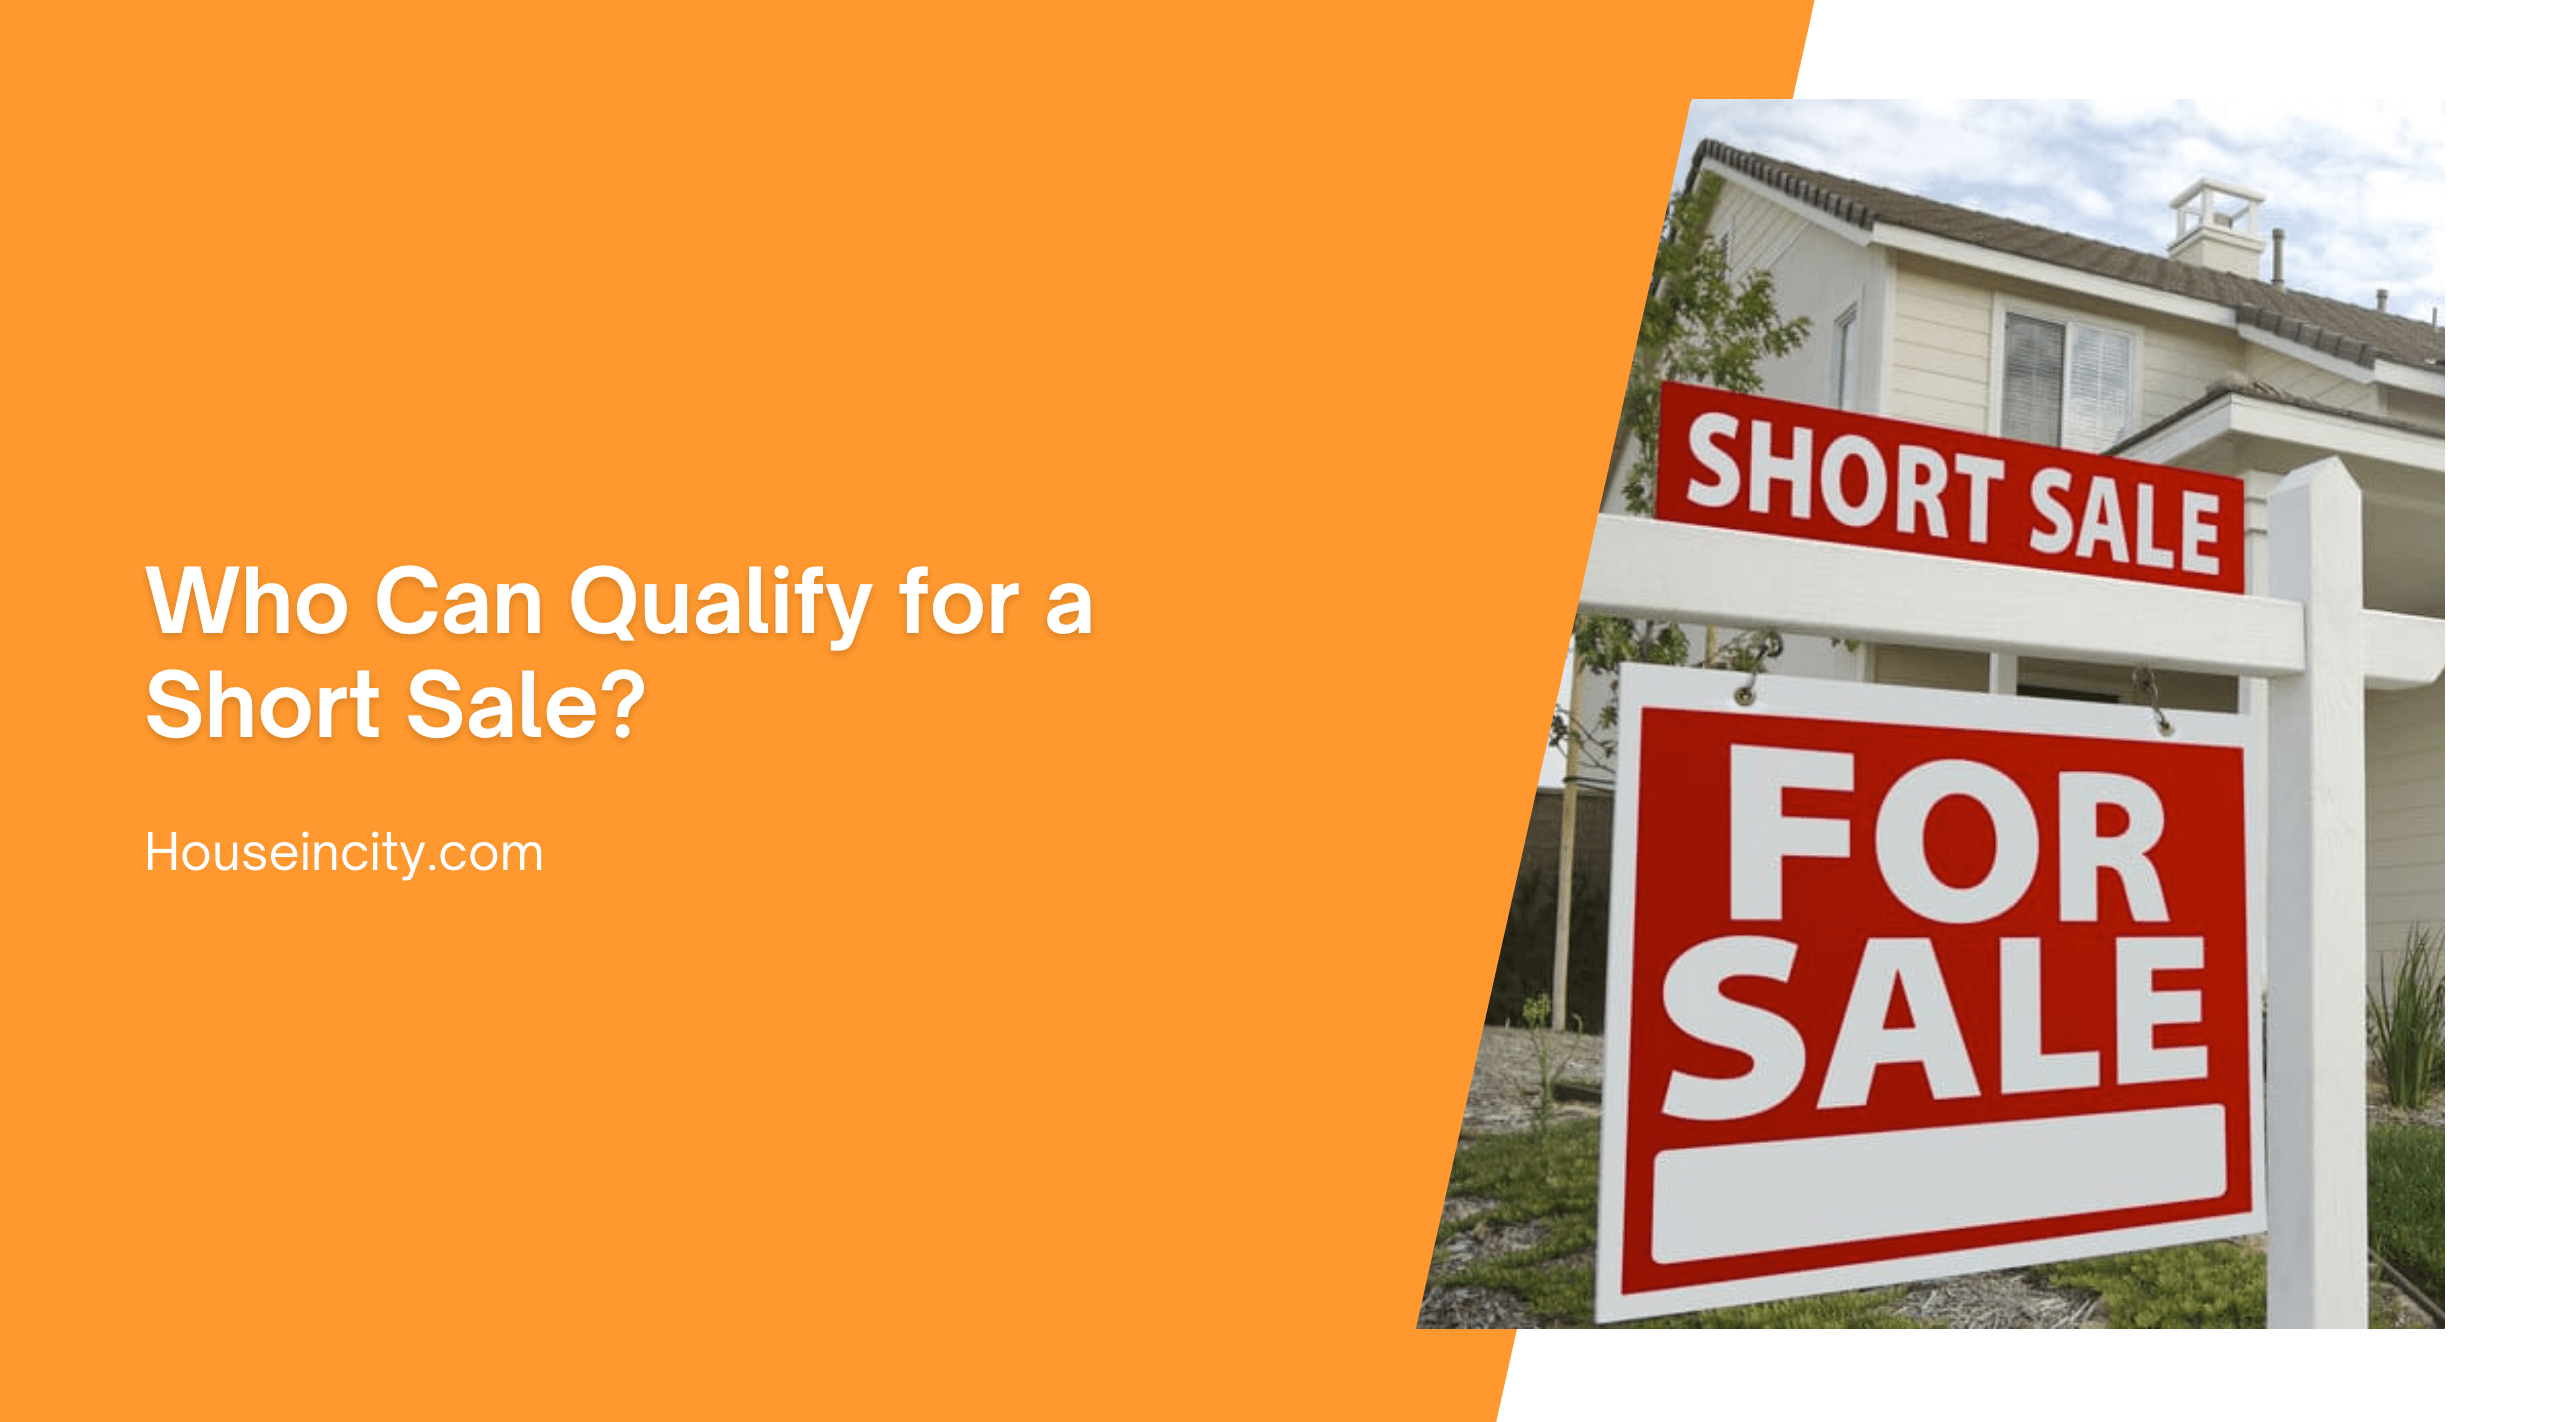 Who Can Qualify for a Short Sale?